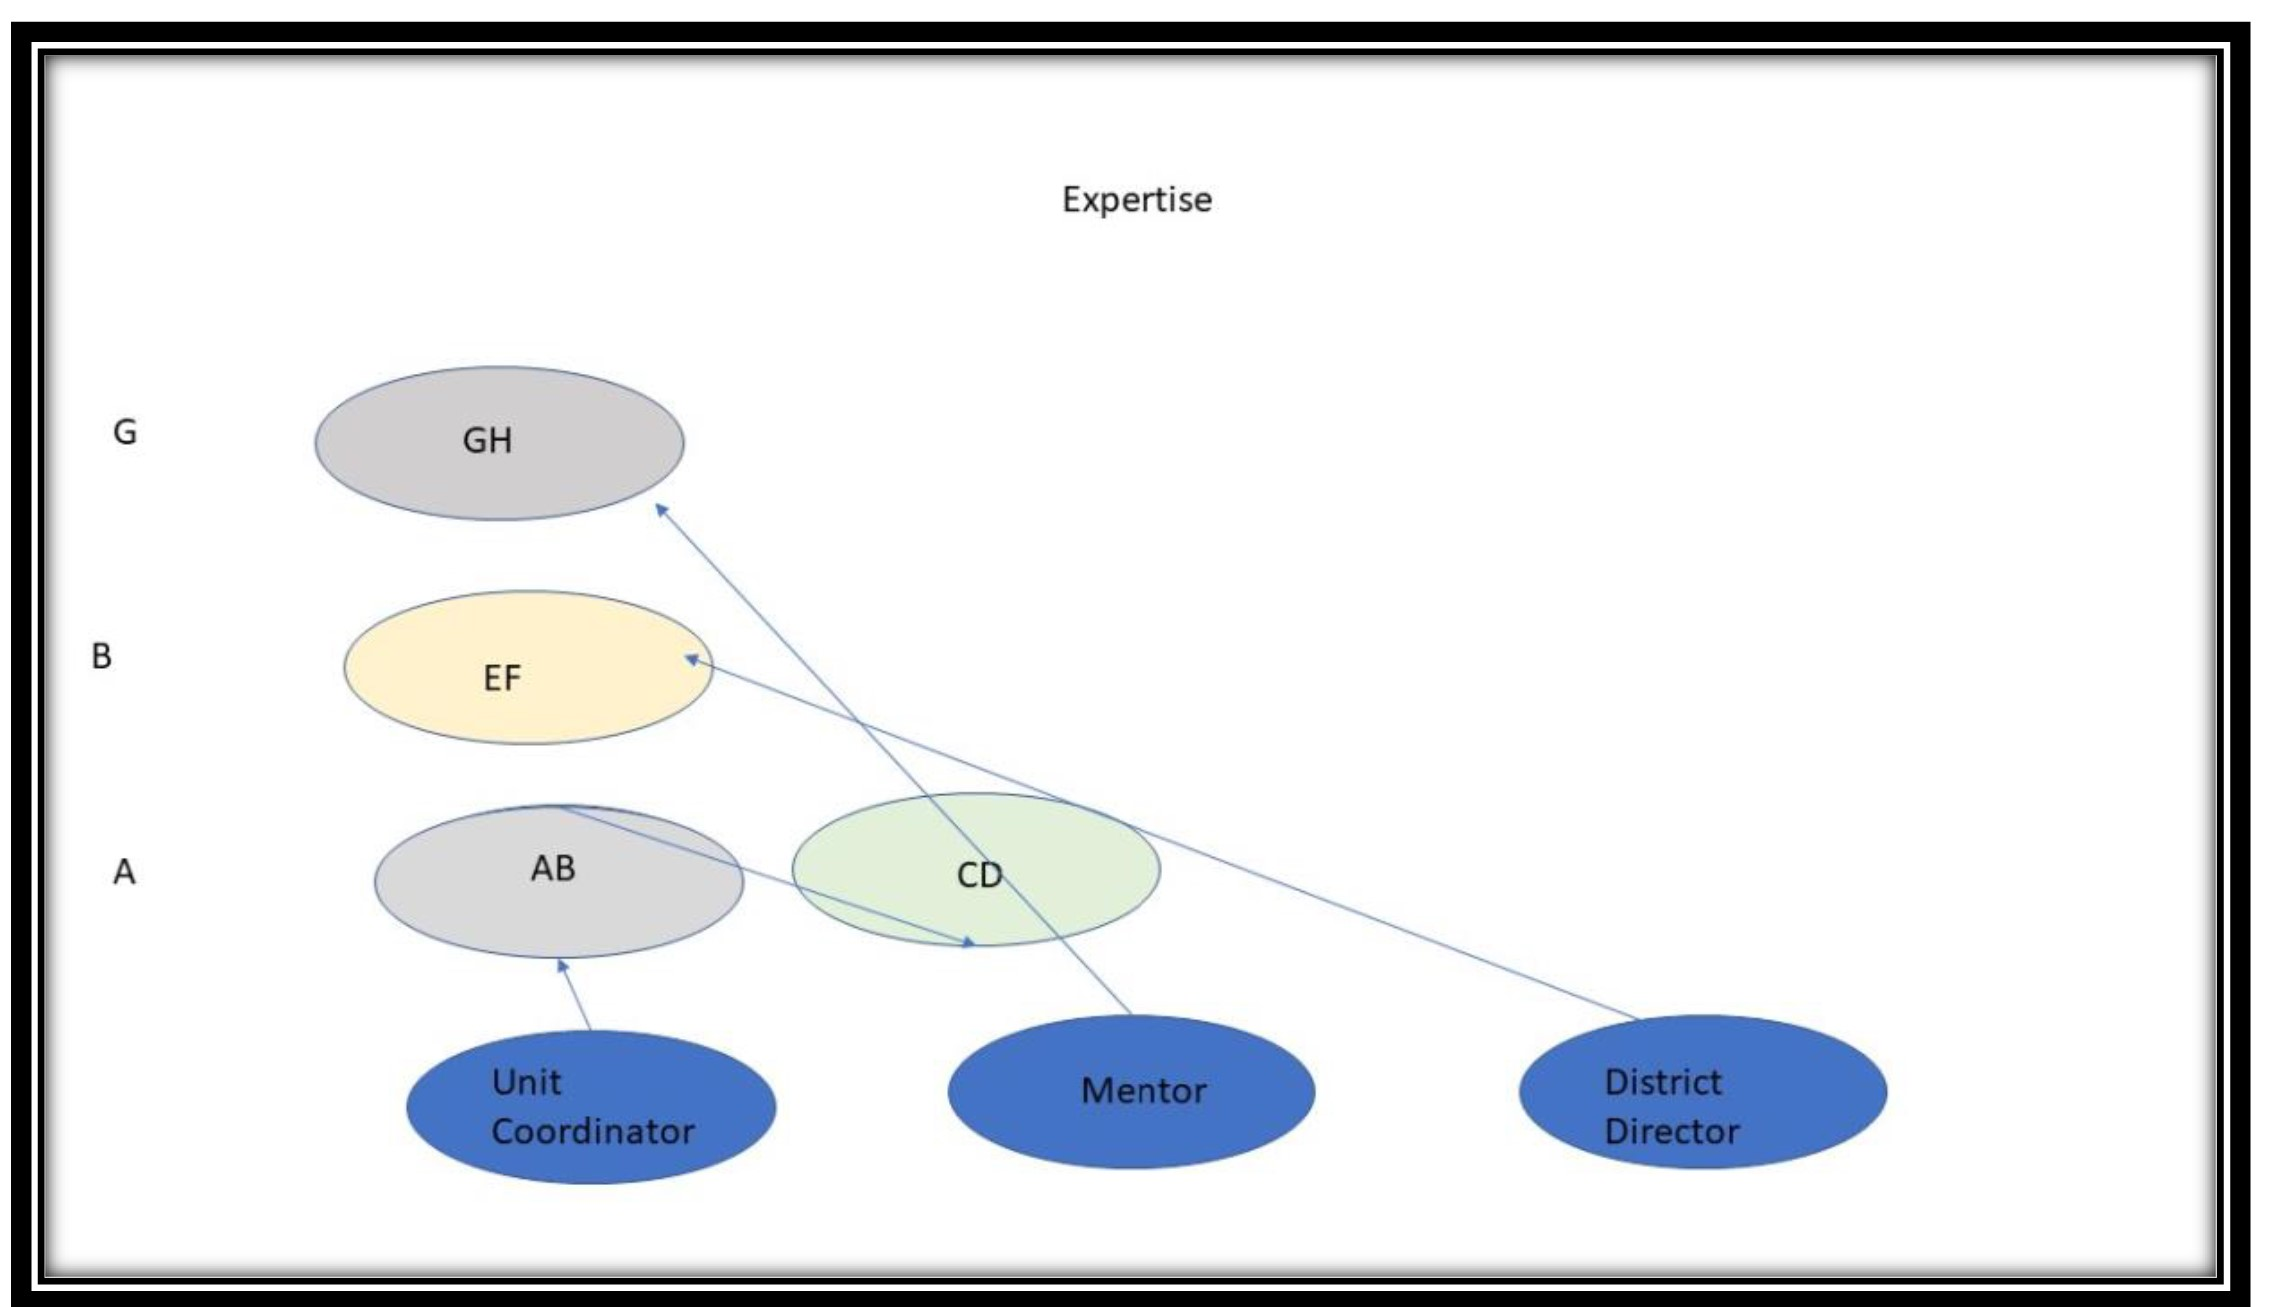 Diagram of expertise areas